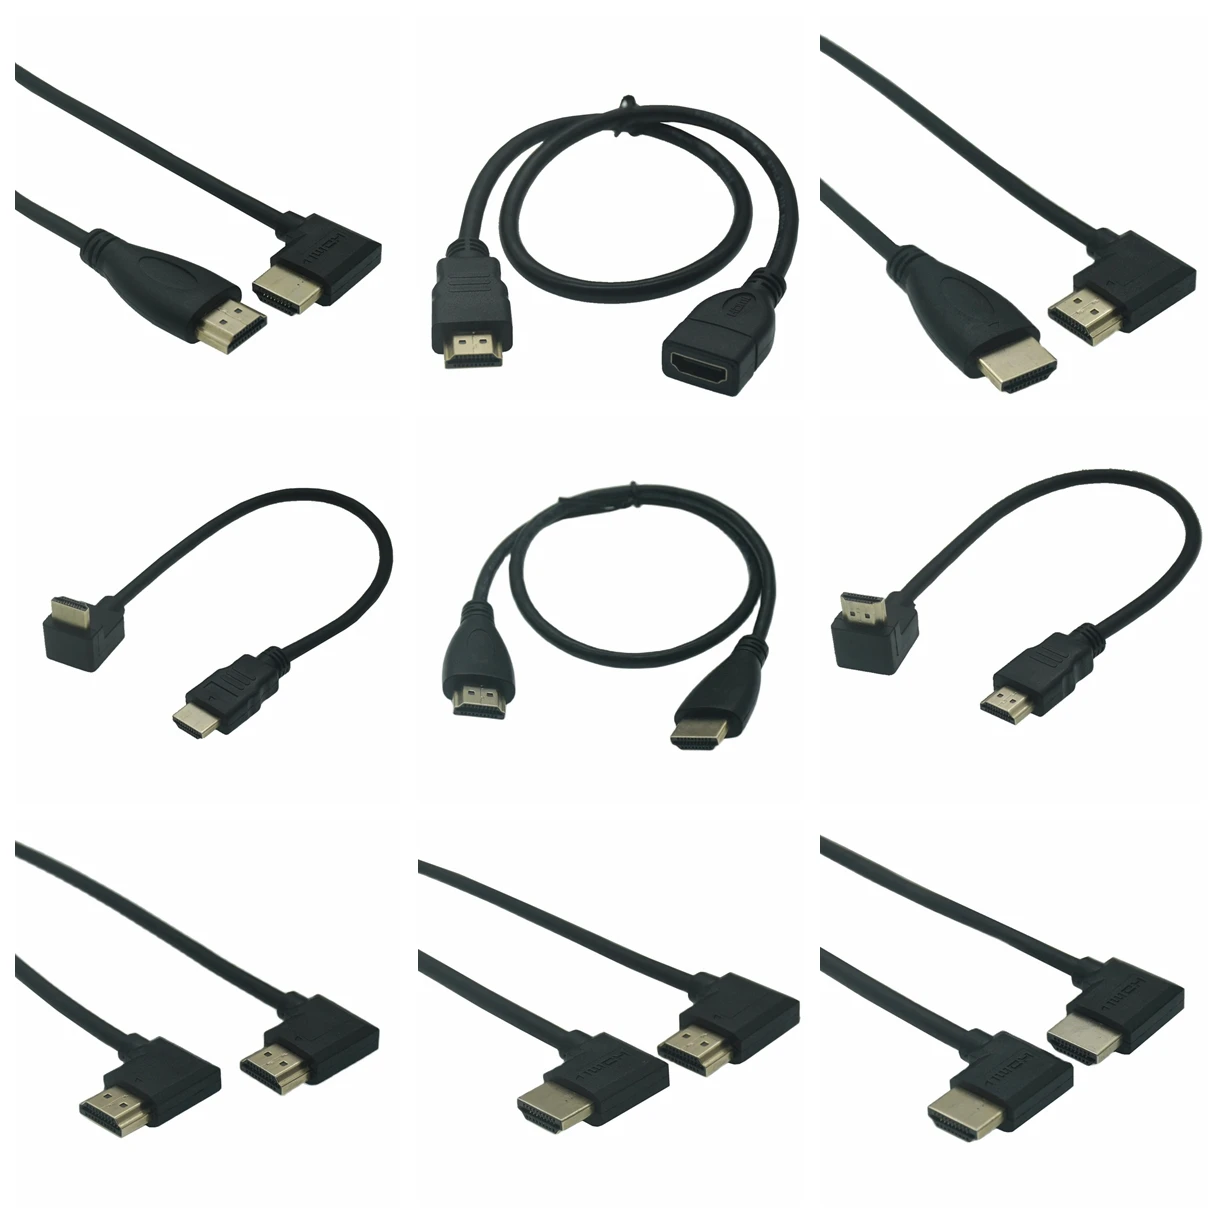 

15cm 30cm 50CM 1m Dual HDMI-compatible Male to Female Converter Up Down Right Left Angled Adapter HDTV Cable for DVD PS3 PC